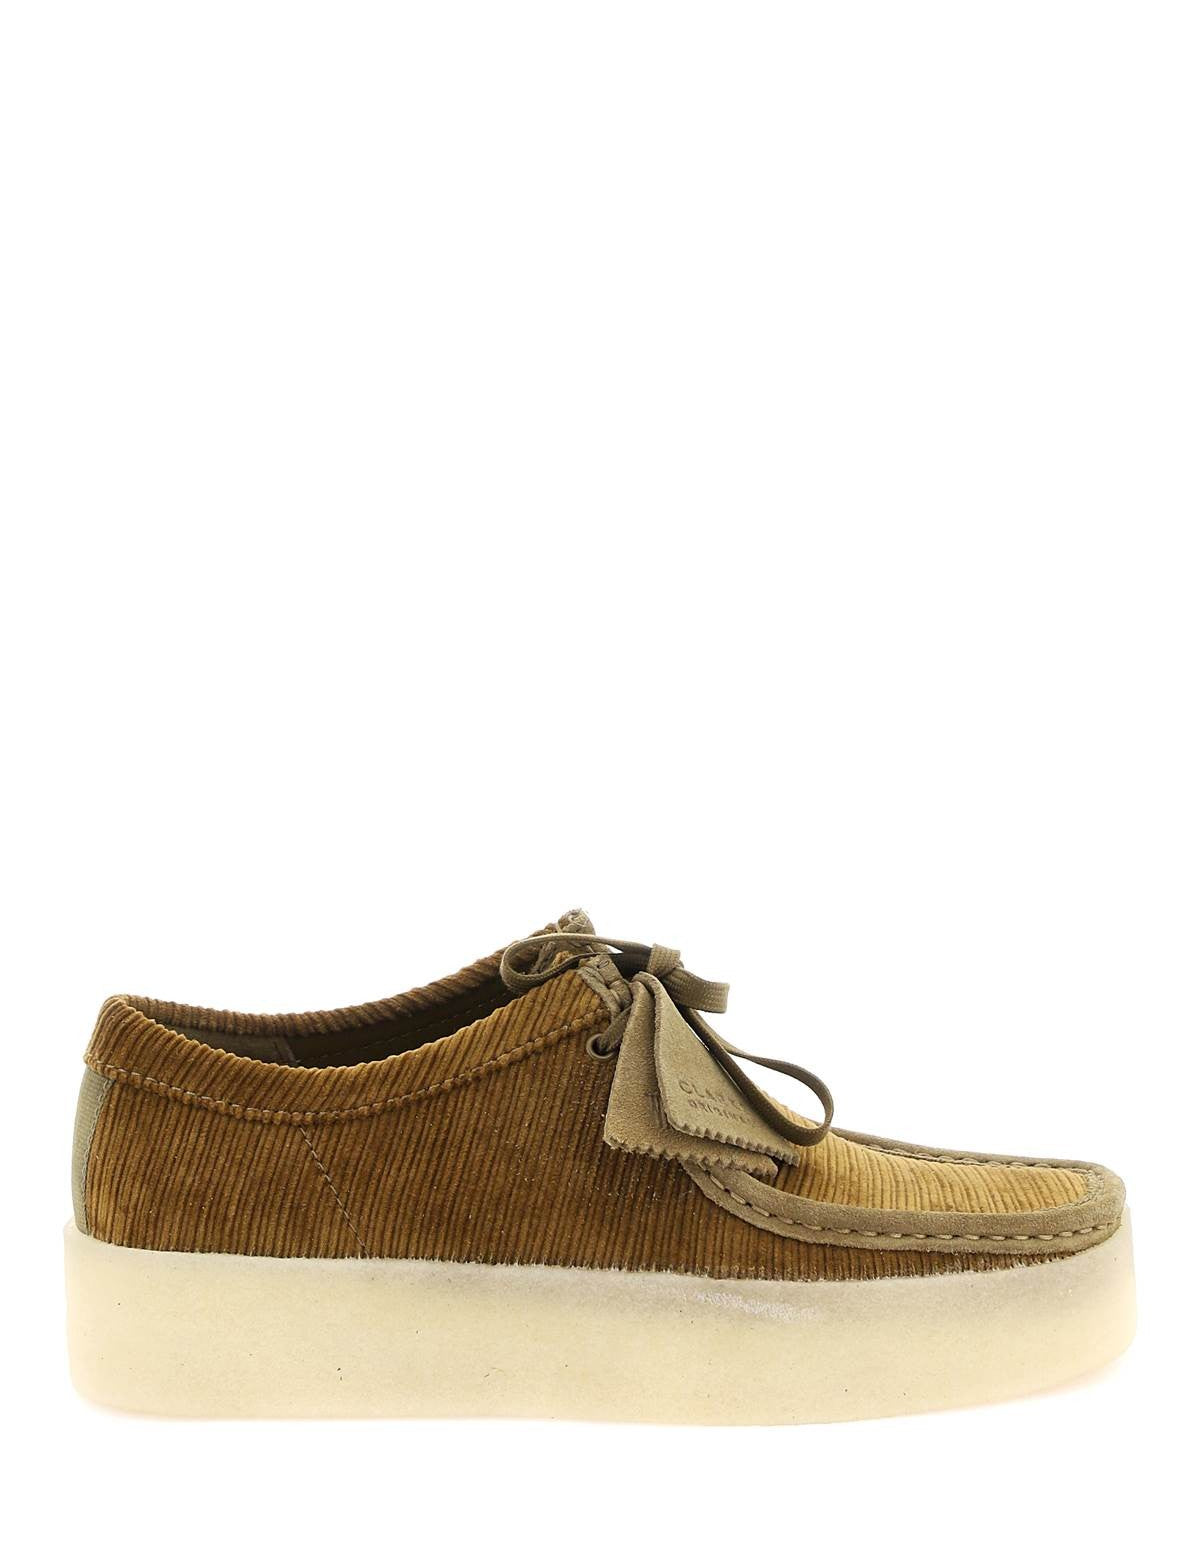 clarks-originals-wallabee-cup-lace-up-shoes.jpg